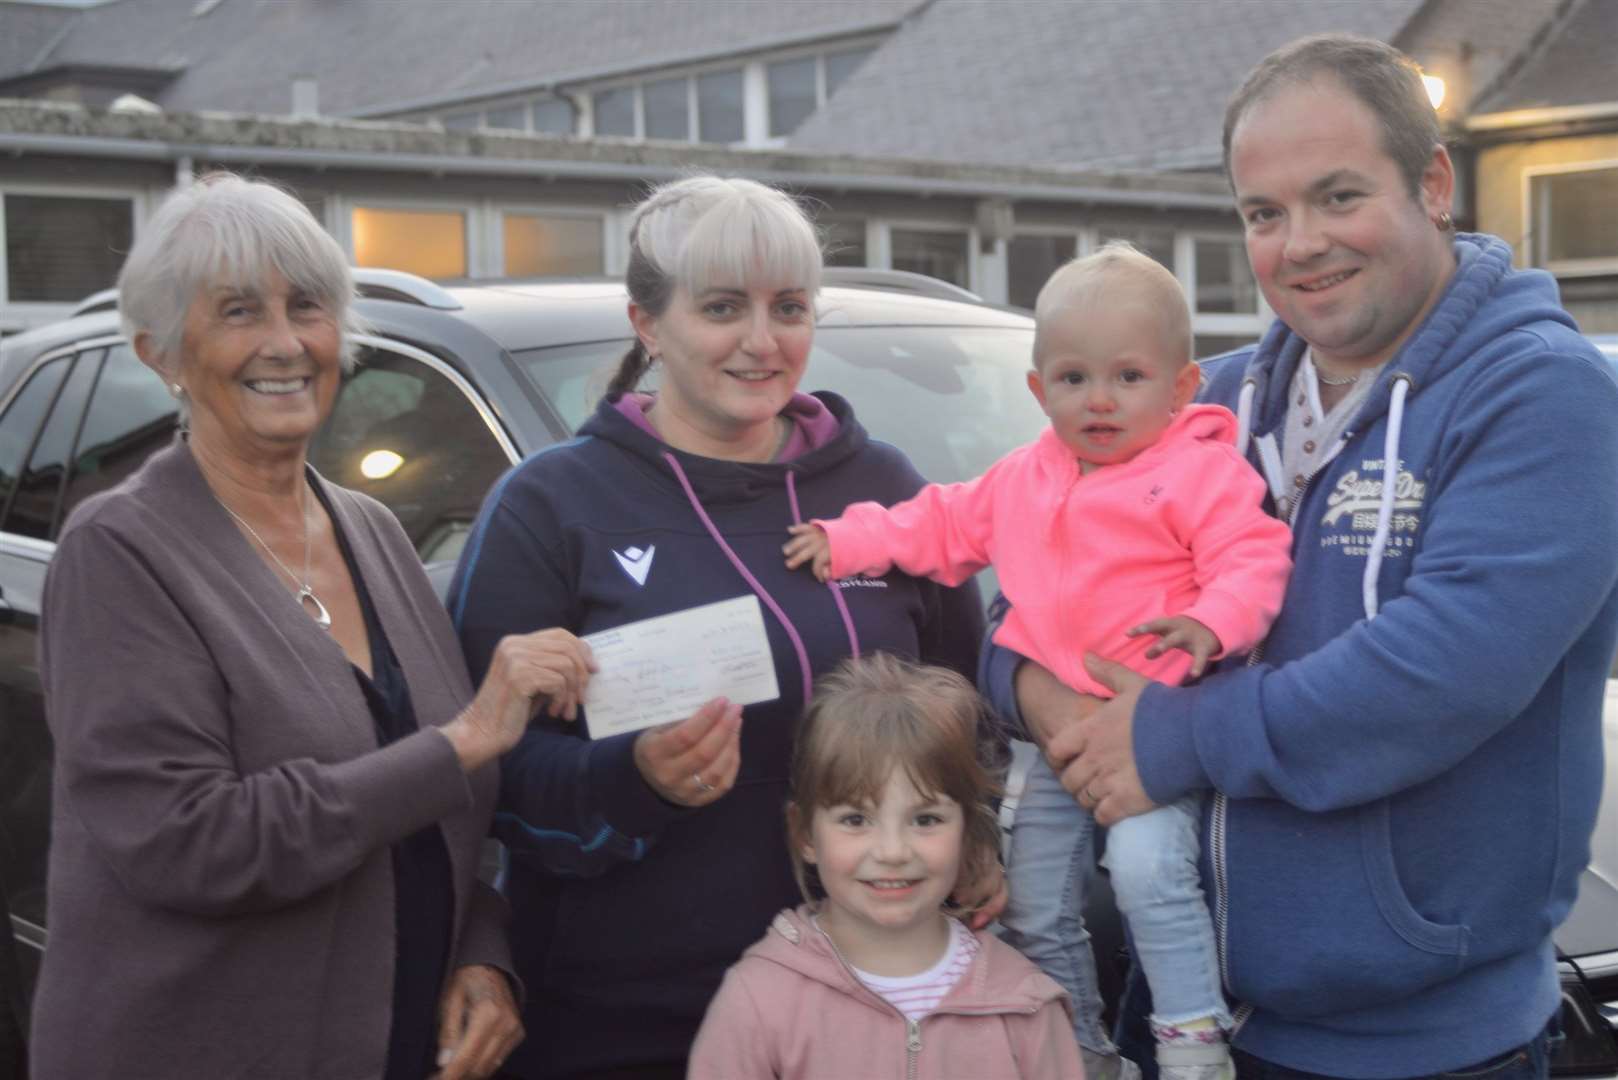 Joan Mackay who compiled the clues and set out the route for the car treasure hunt hands over the top prize to the Macleod family from Strathy. Picture: Jim A Johnston